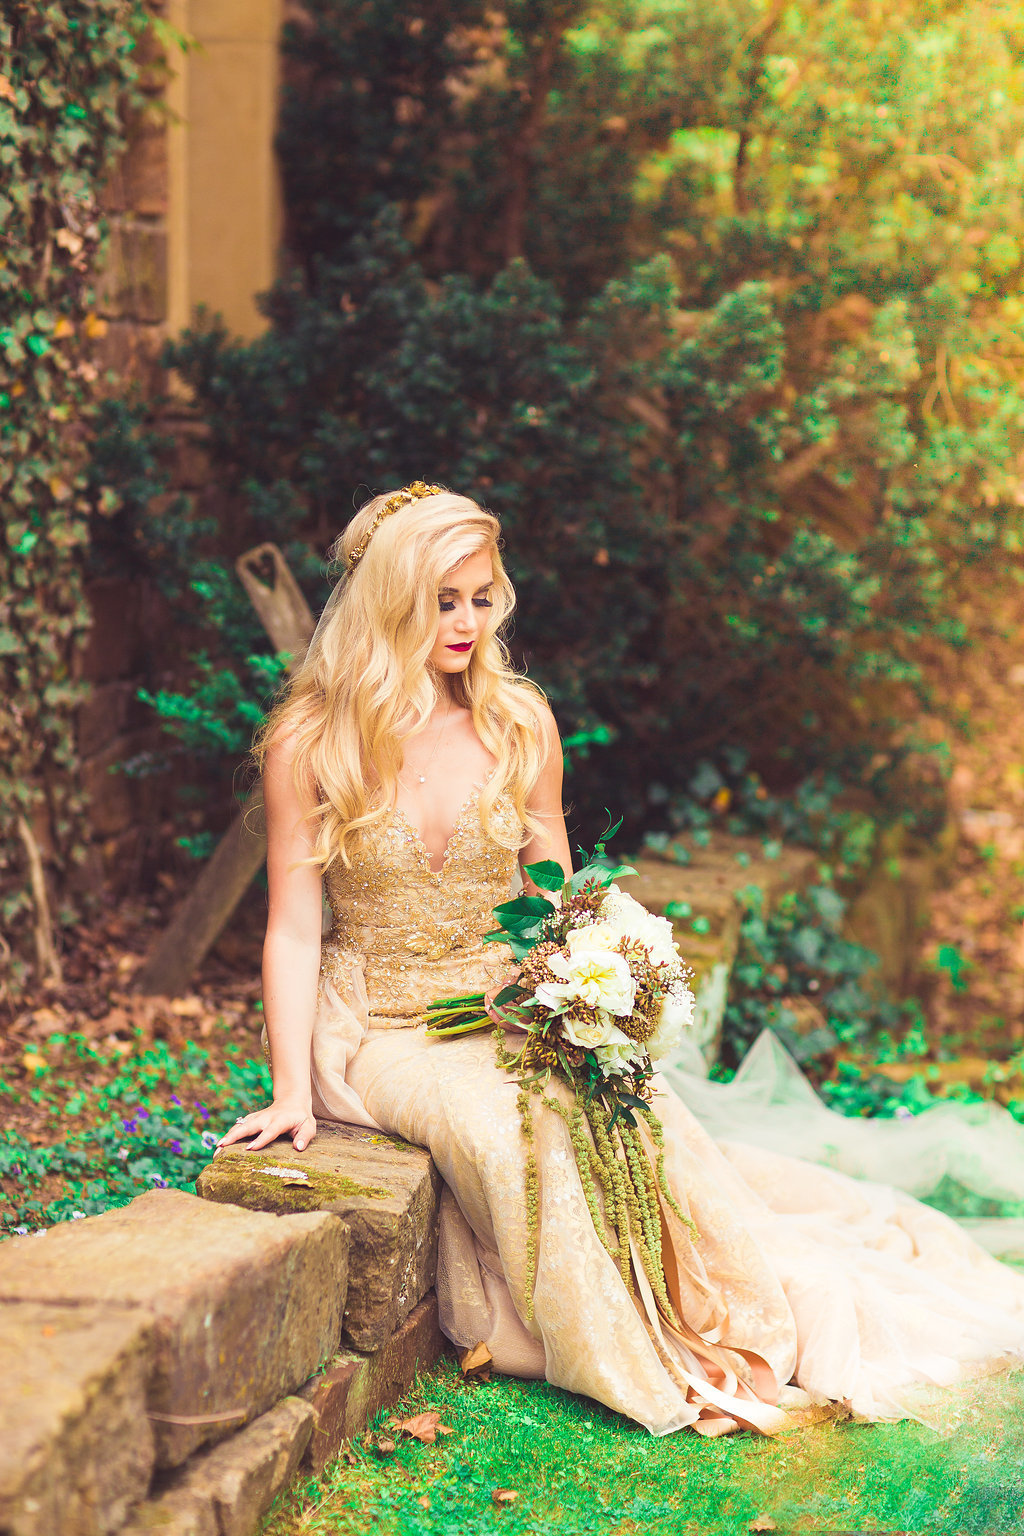 Wedding Photograph Of Bride Holding a Bouquet While Sitting Los Angeles